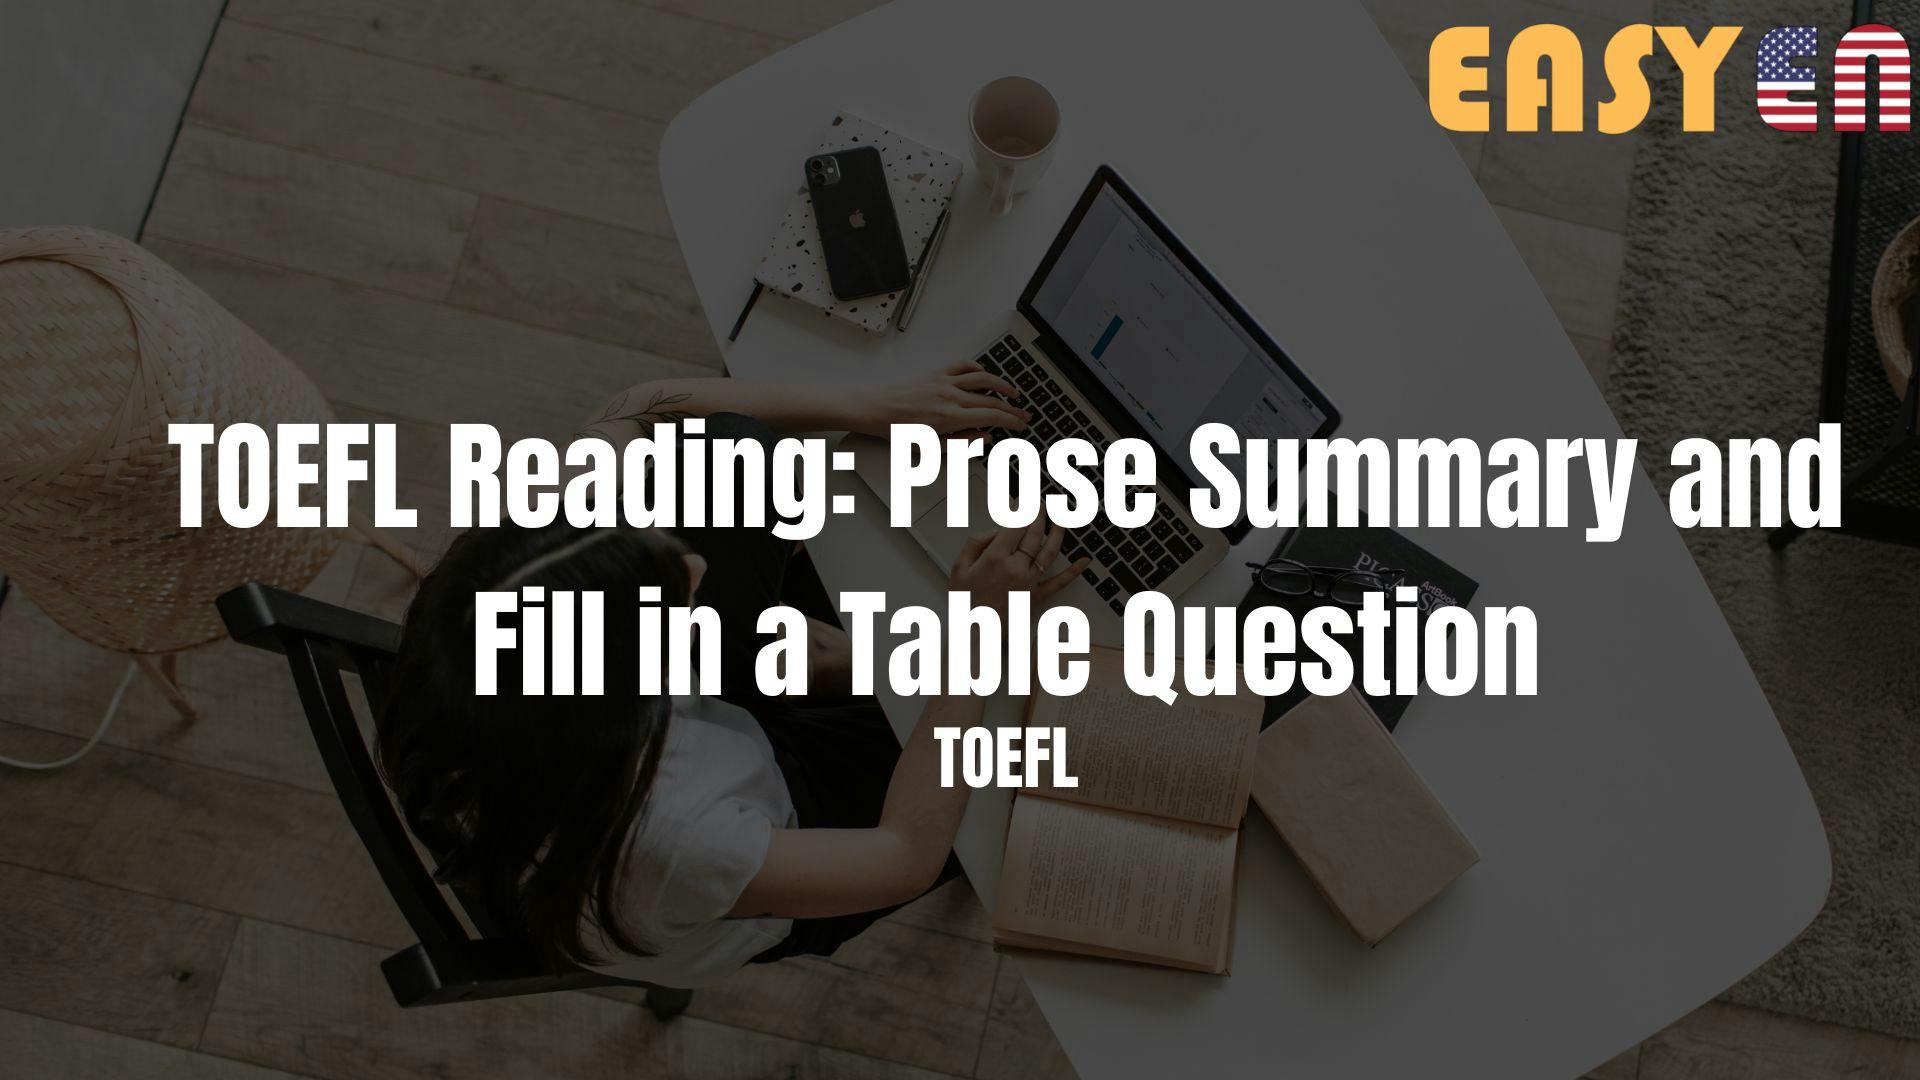 TOEFL Reading: Prose Summary and Fill in a Table Question